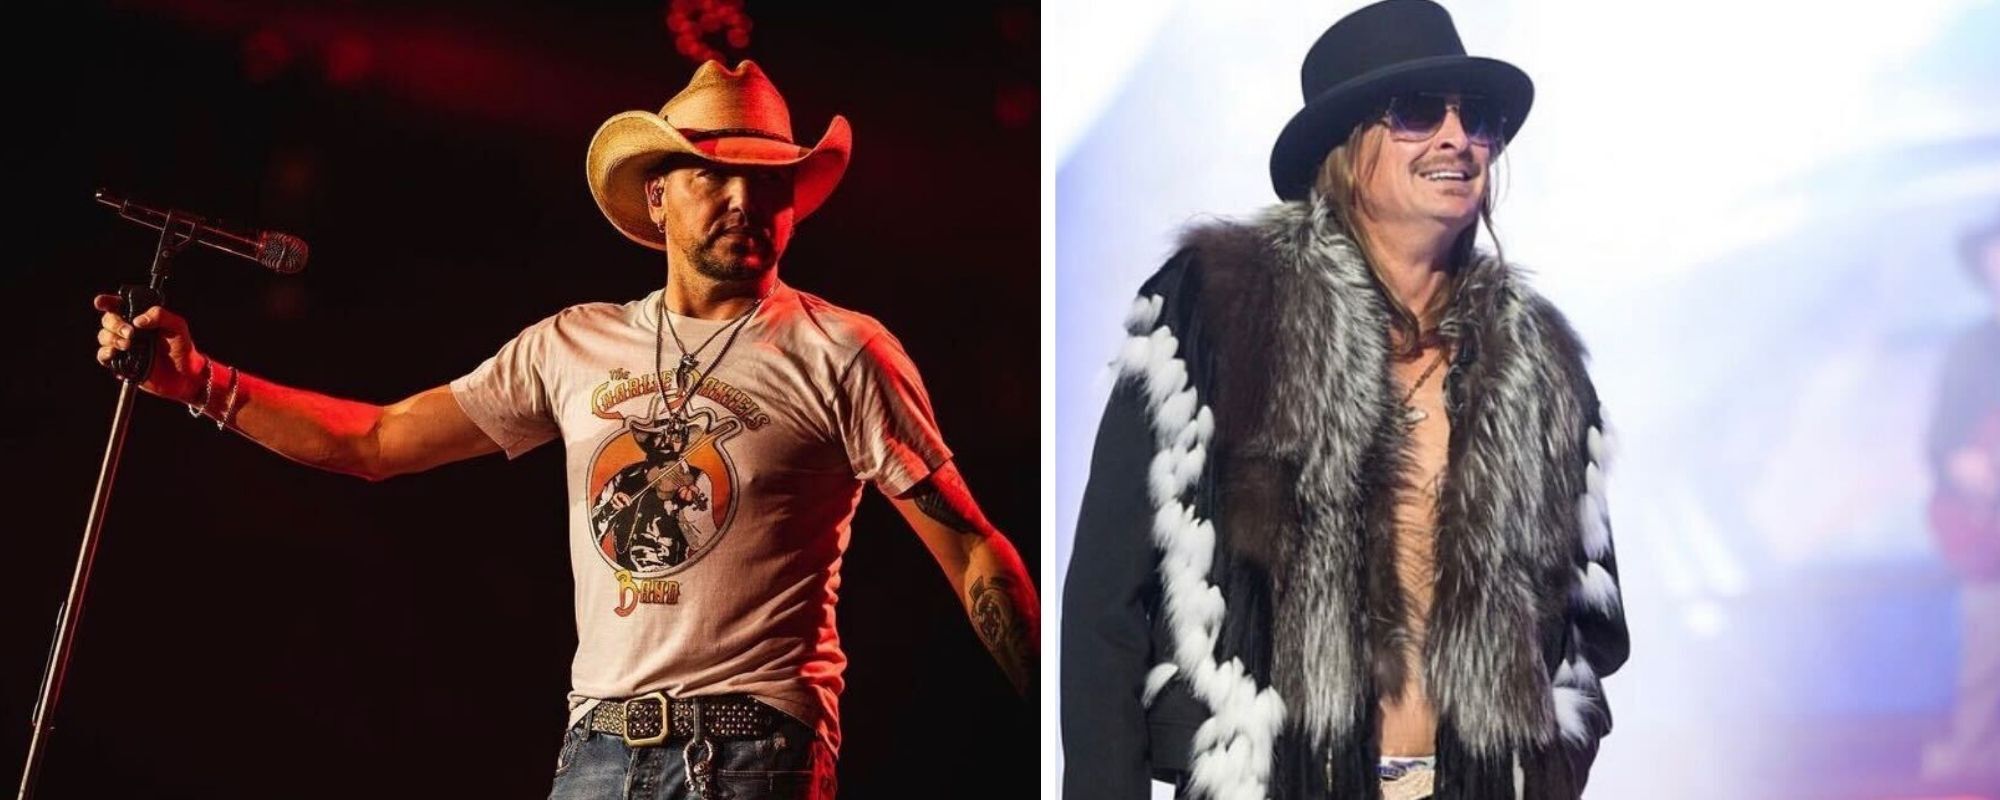 Jason Aldean and Kid Rock Headline Festival Aimed at Small Towns